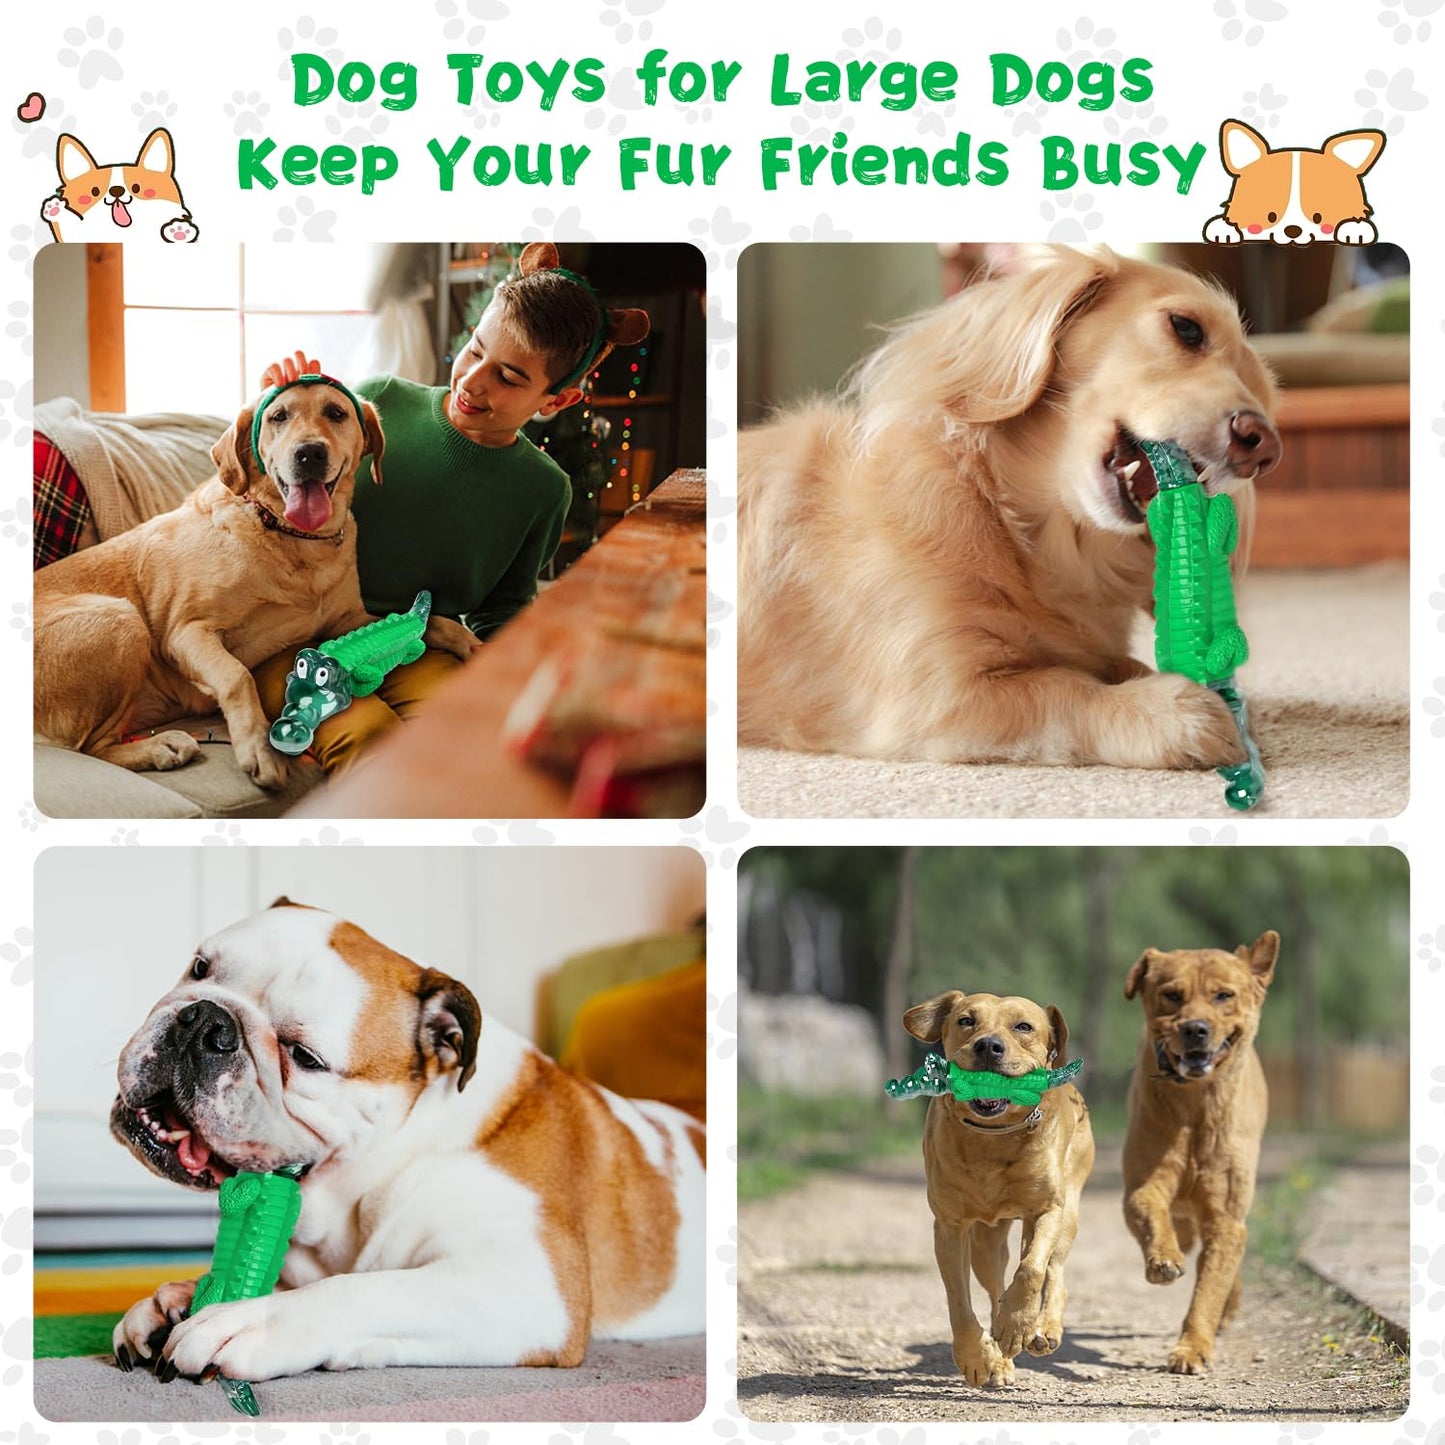 Fuufome Chew Toys for Aggressive Chewers: Tough Indestructible Toys for Large Dogs - Heavy Duty Durable Toys for Small, Medium and Large Dog Breeds